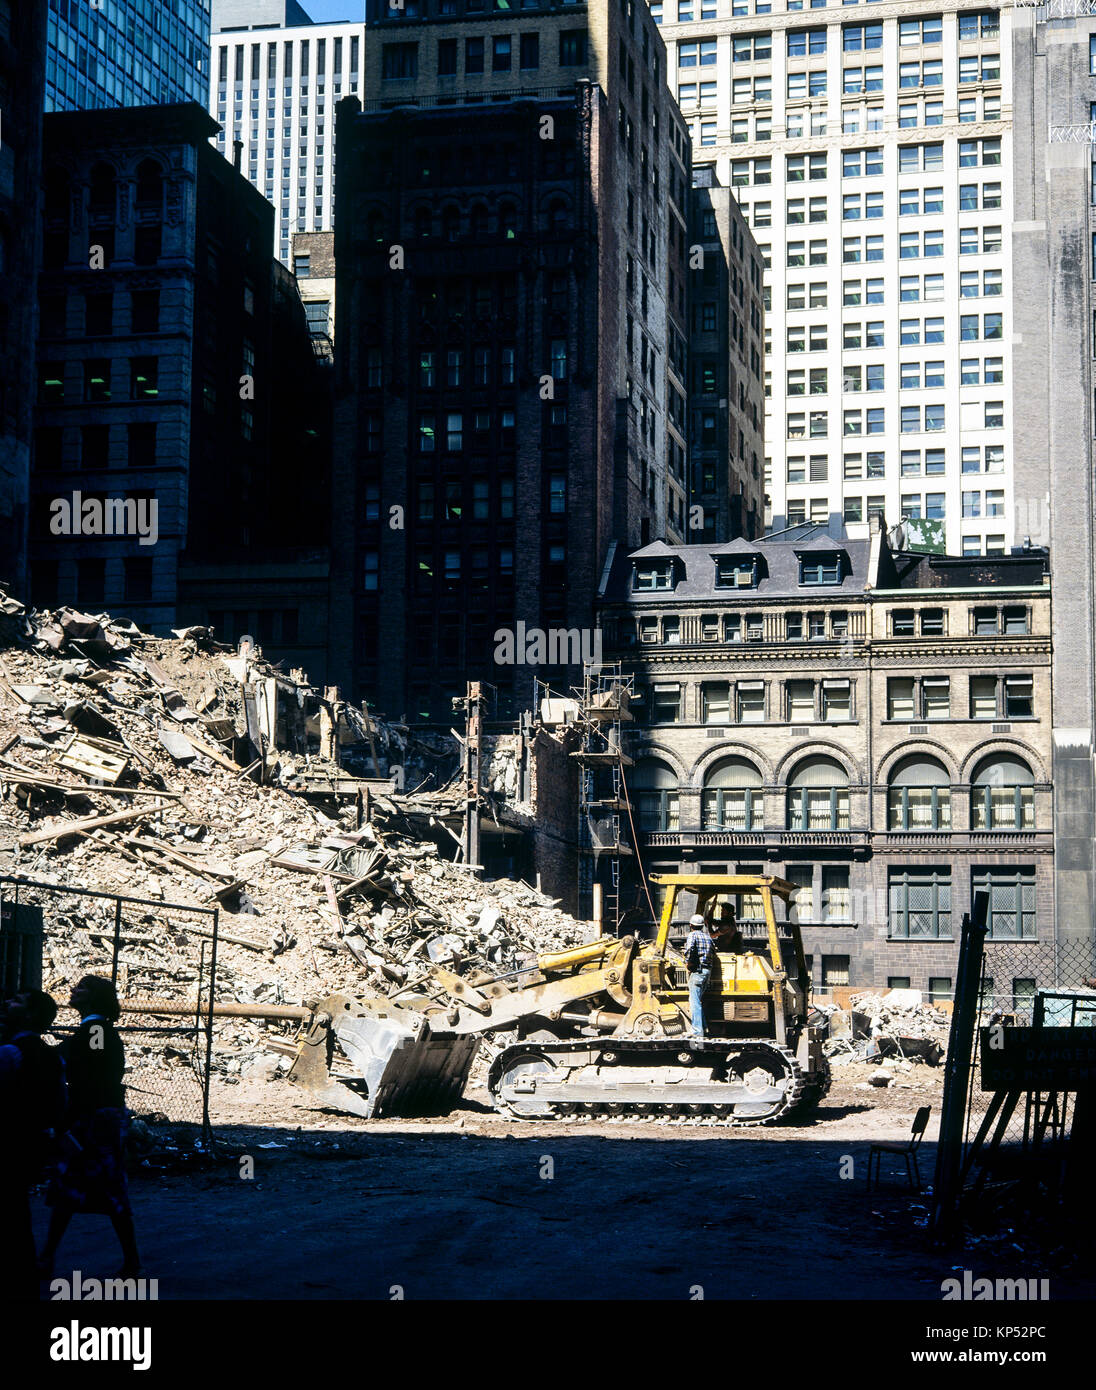 May 1982,New York,demolition site,bulldozer,construction workers,Wall street,financial district,New york City,NY,NYC,USA, Stock Photo